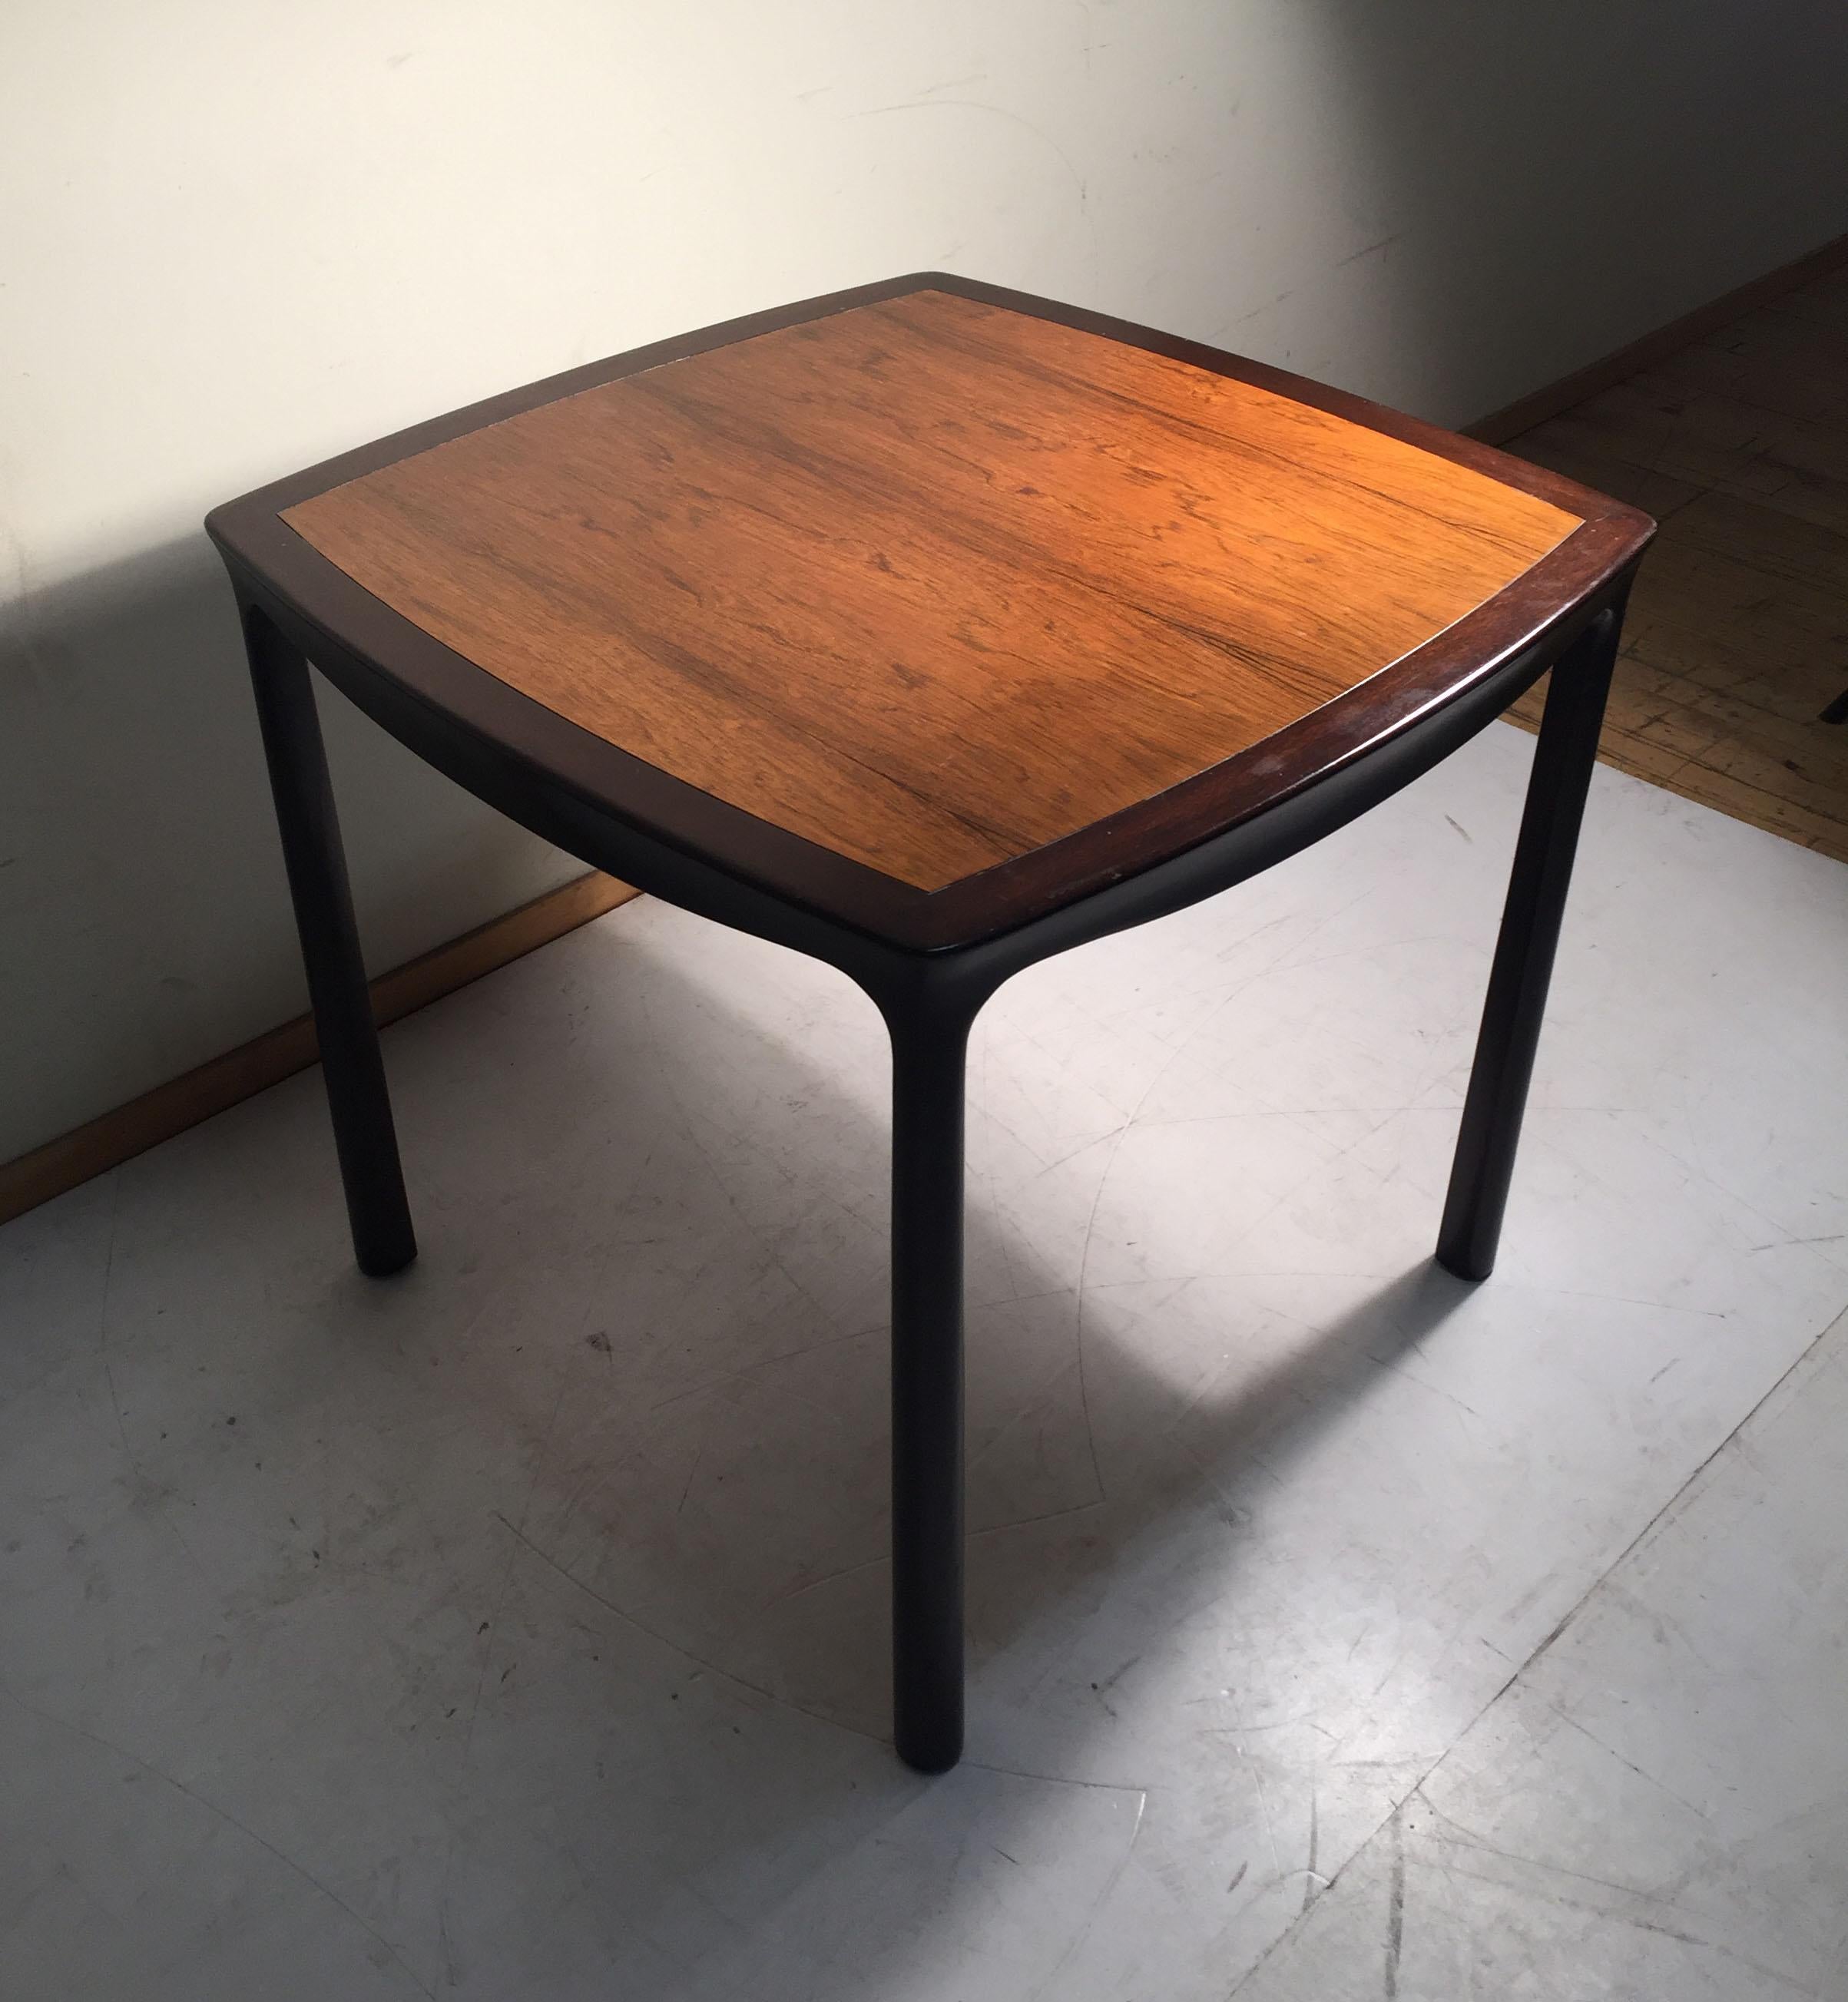 Elegant Edward Wormley dinette table for Dunbar. Appears to be rosewood.